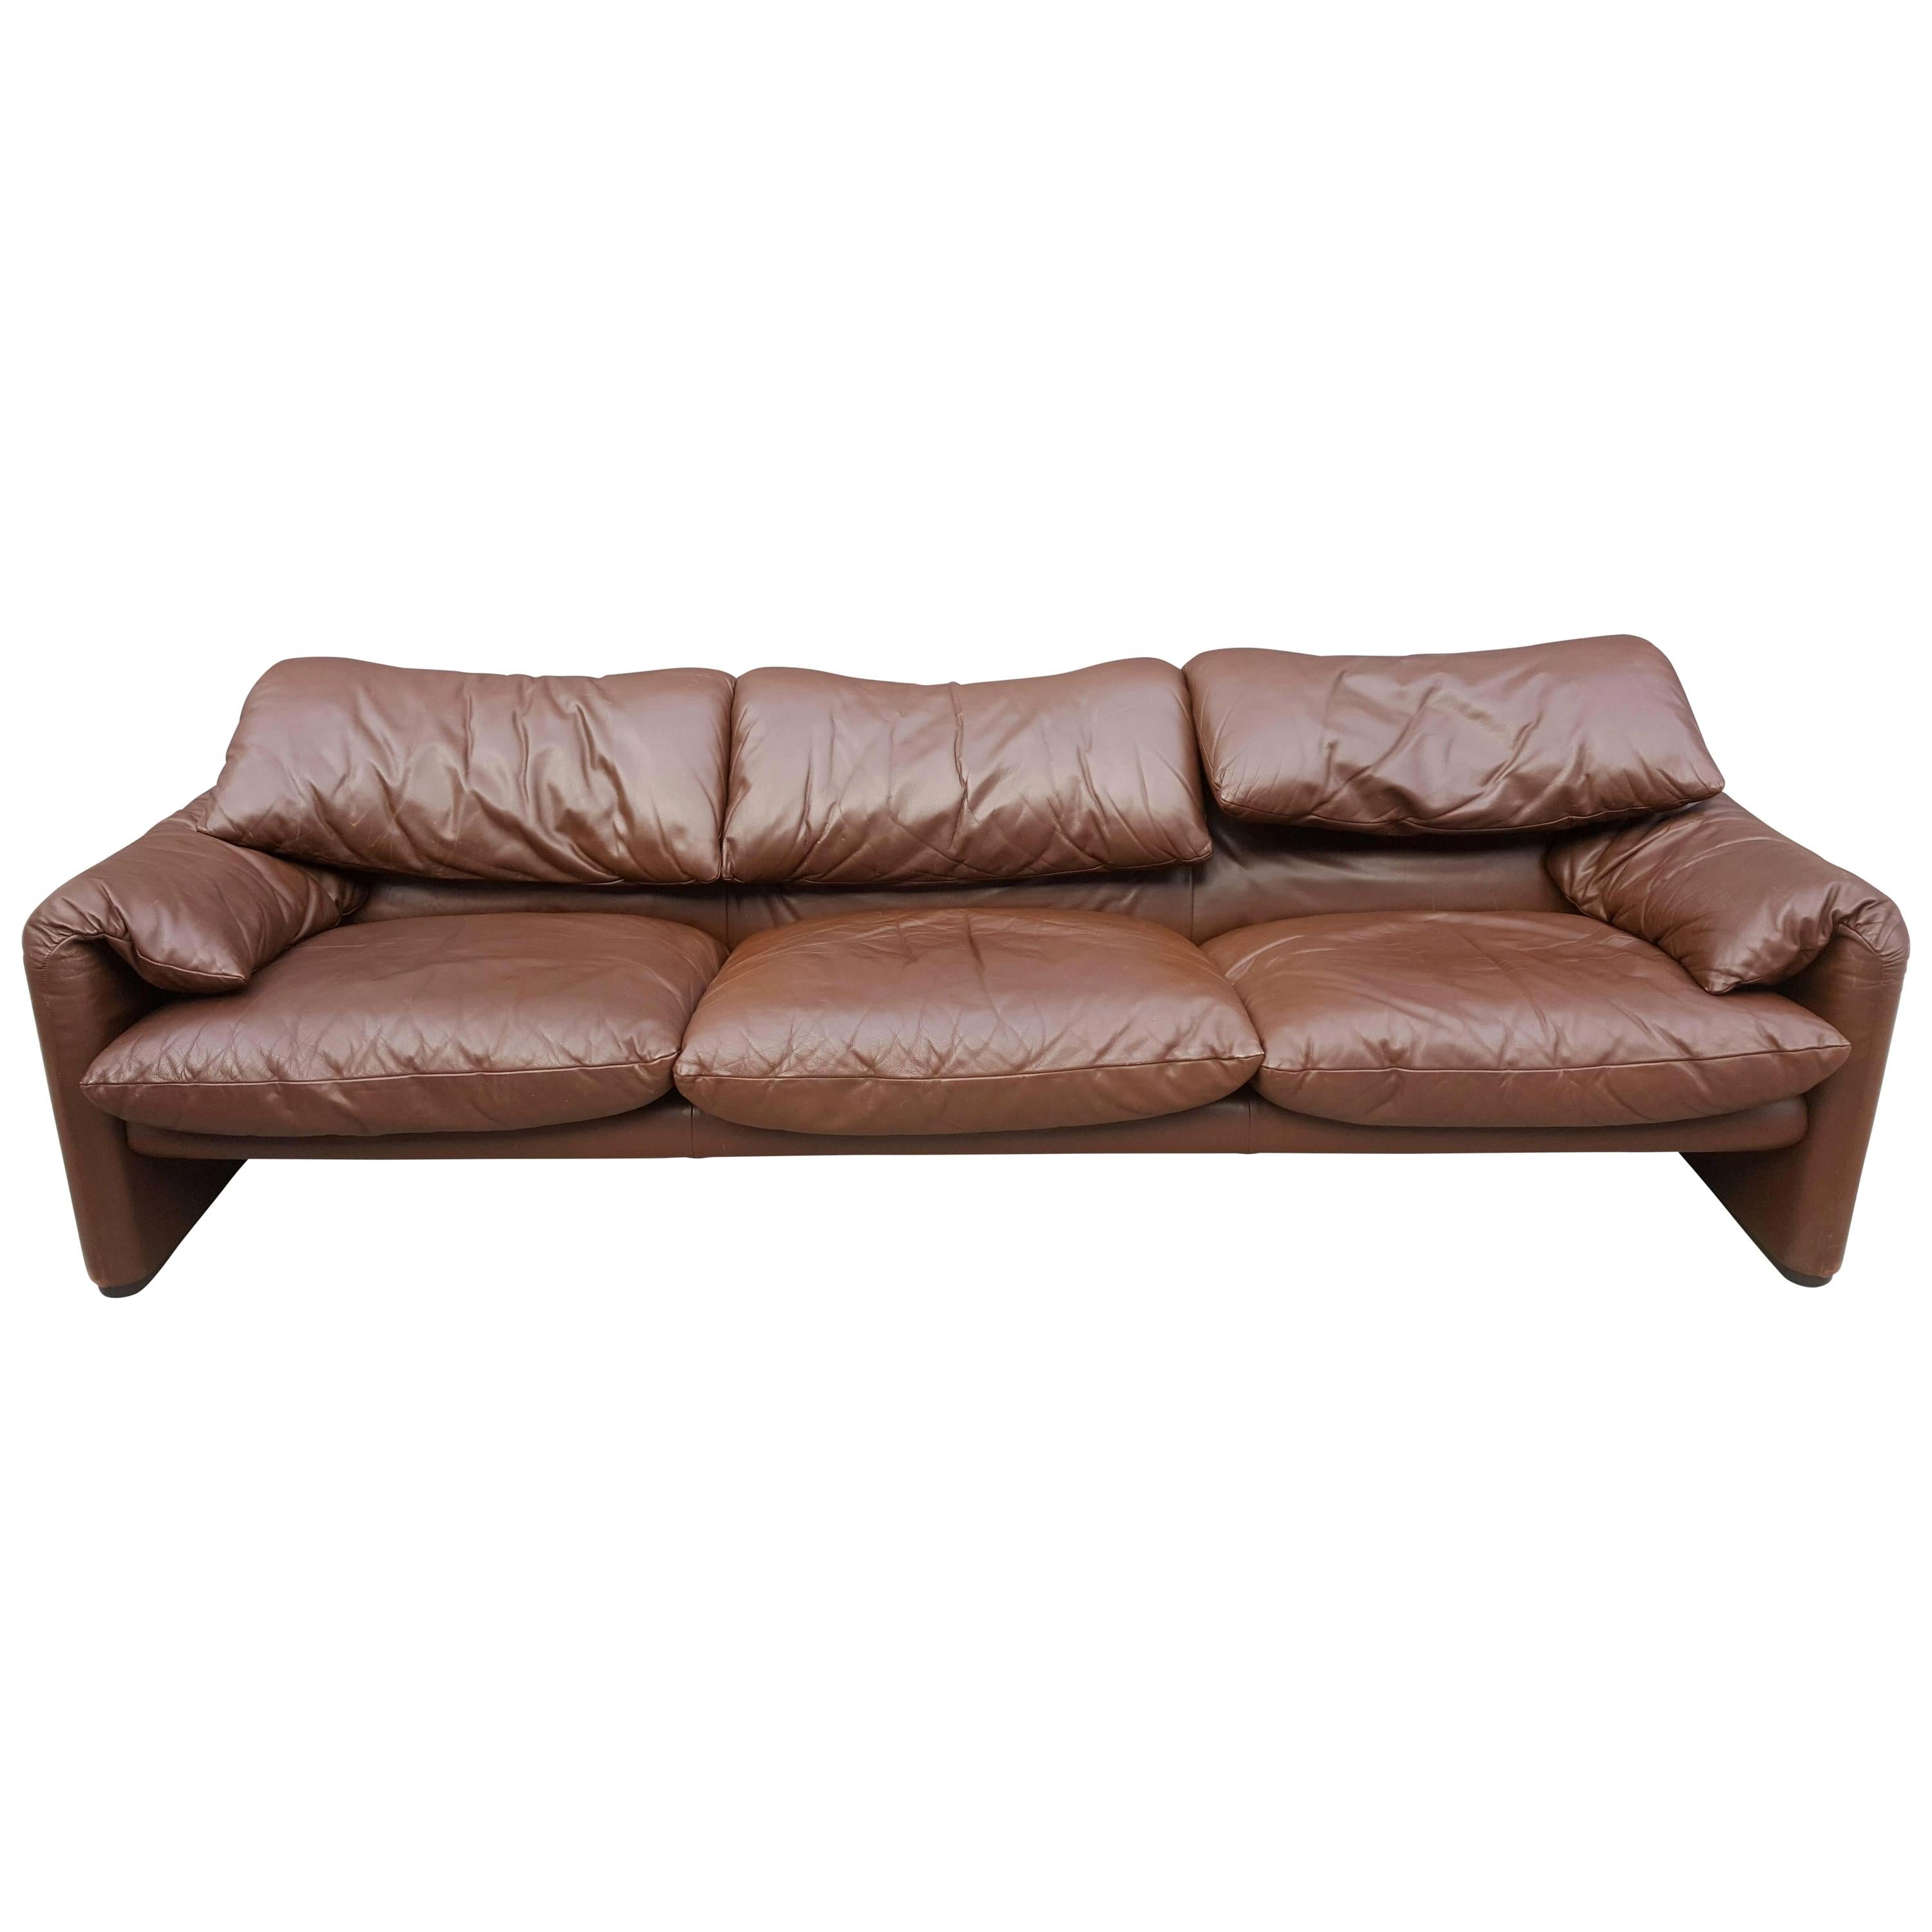 Vintage brown leather maralunga sofa set designed by Vico Magistretti for Cassina.

Award winning design piece from 1973 with adjustable backrests.

The set consists of a 3-seat sofa and two one-seat sofas.

Very good condition

1973,